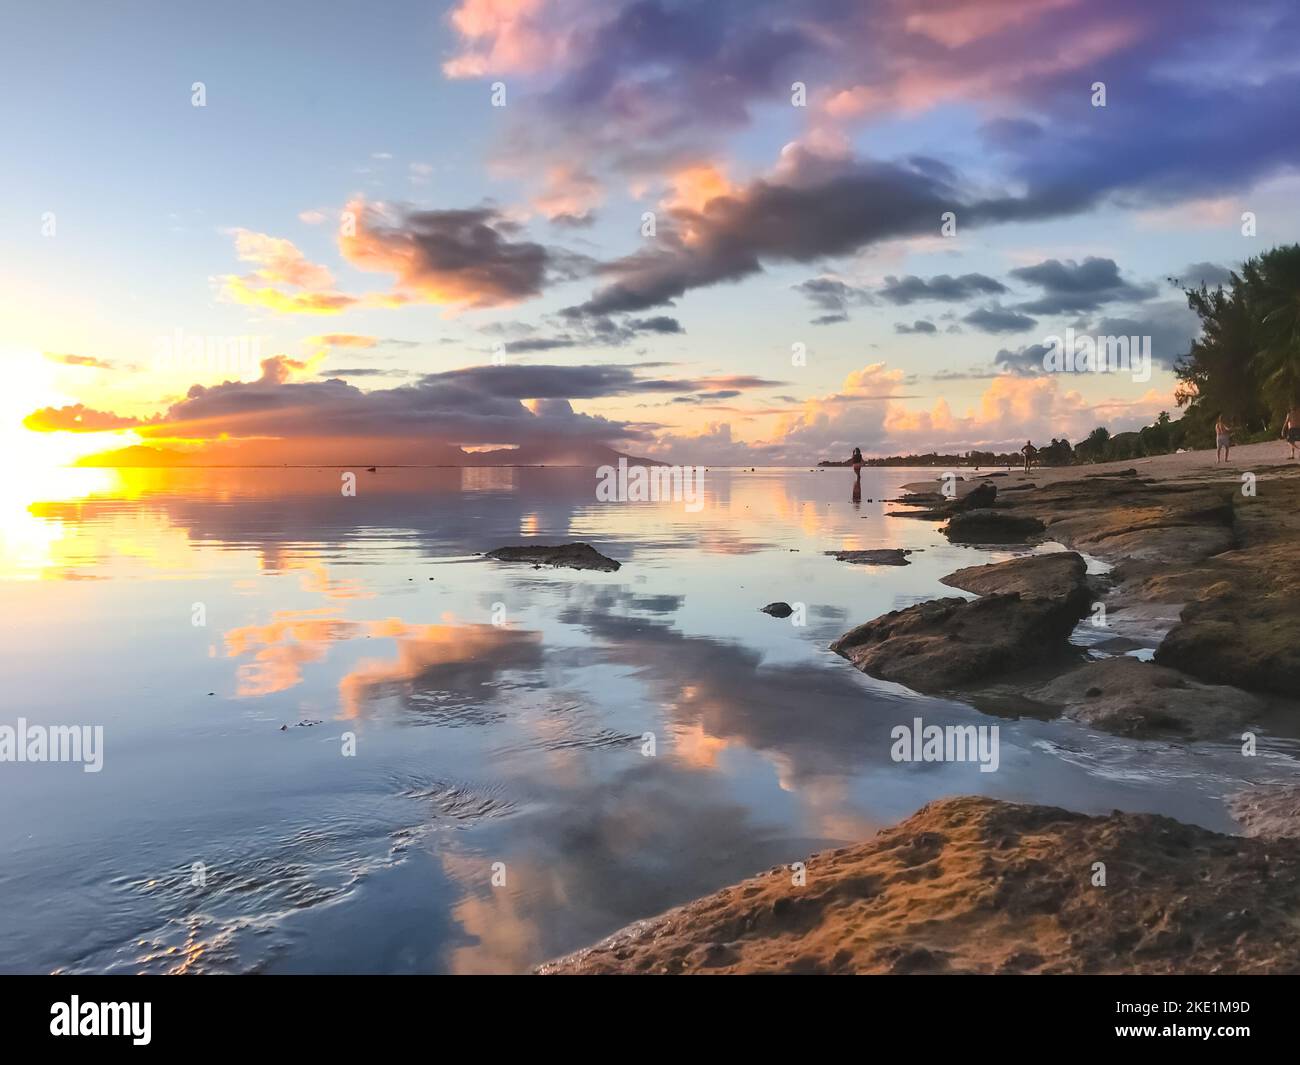 Bright tropial sunset reflected in ocean water. Colorful clouds in sky and rocky seashore. Amazing natural summer scenery. Wonderful Nature landscape during sunset. Travel, tourism, relax. Stock Photo